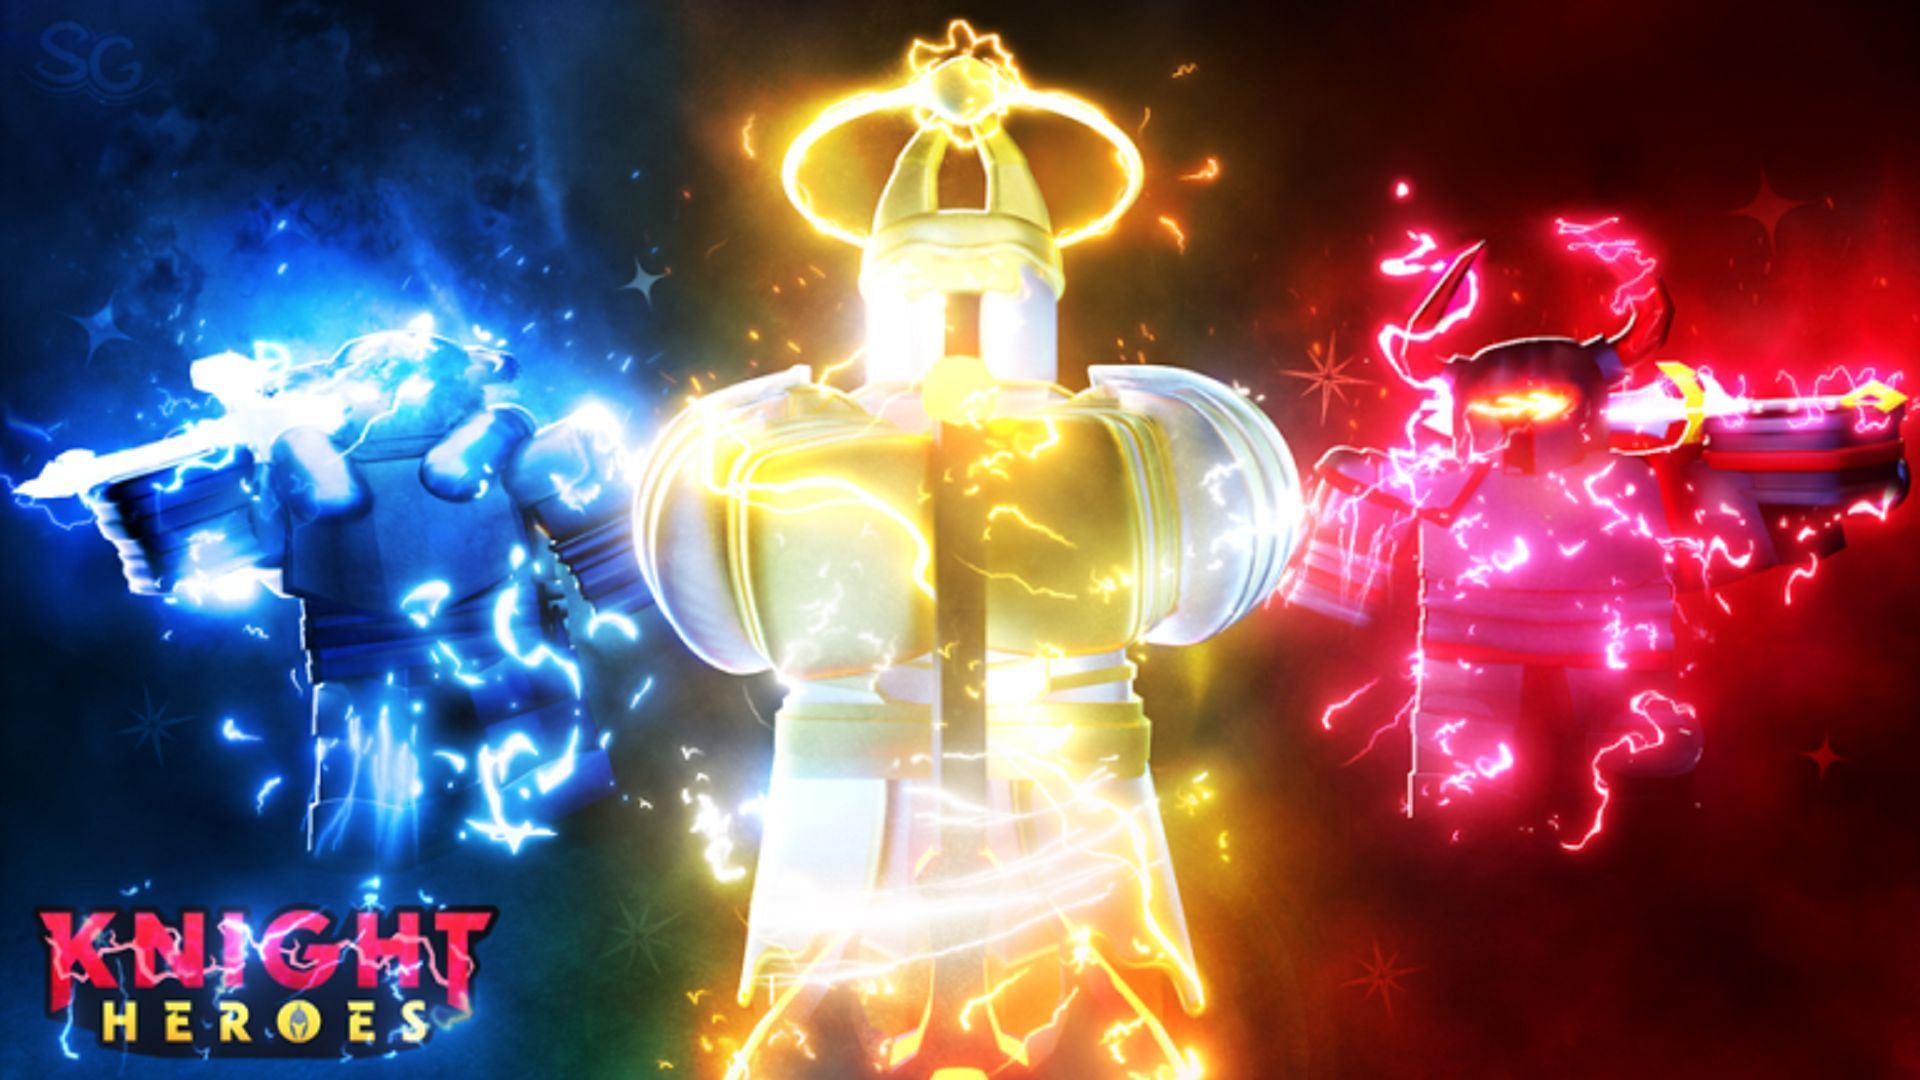 Every working code for Knight Heroes (Image via Roblox)